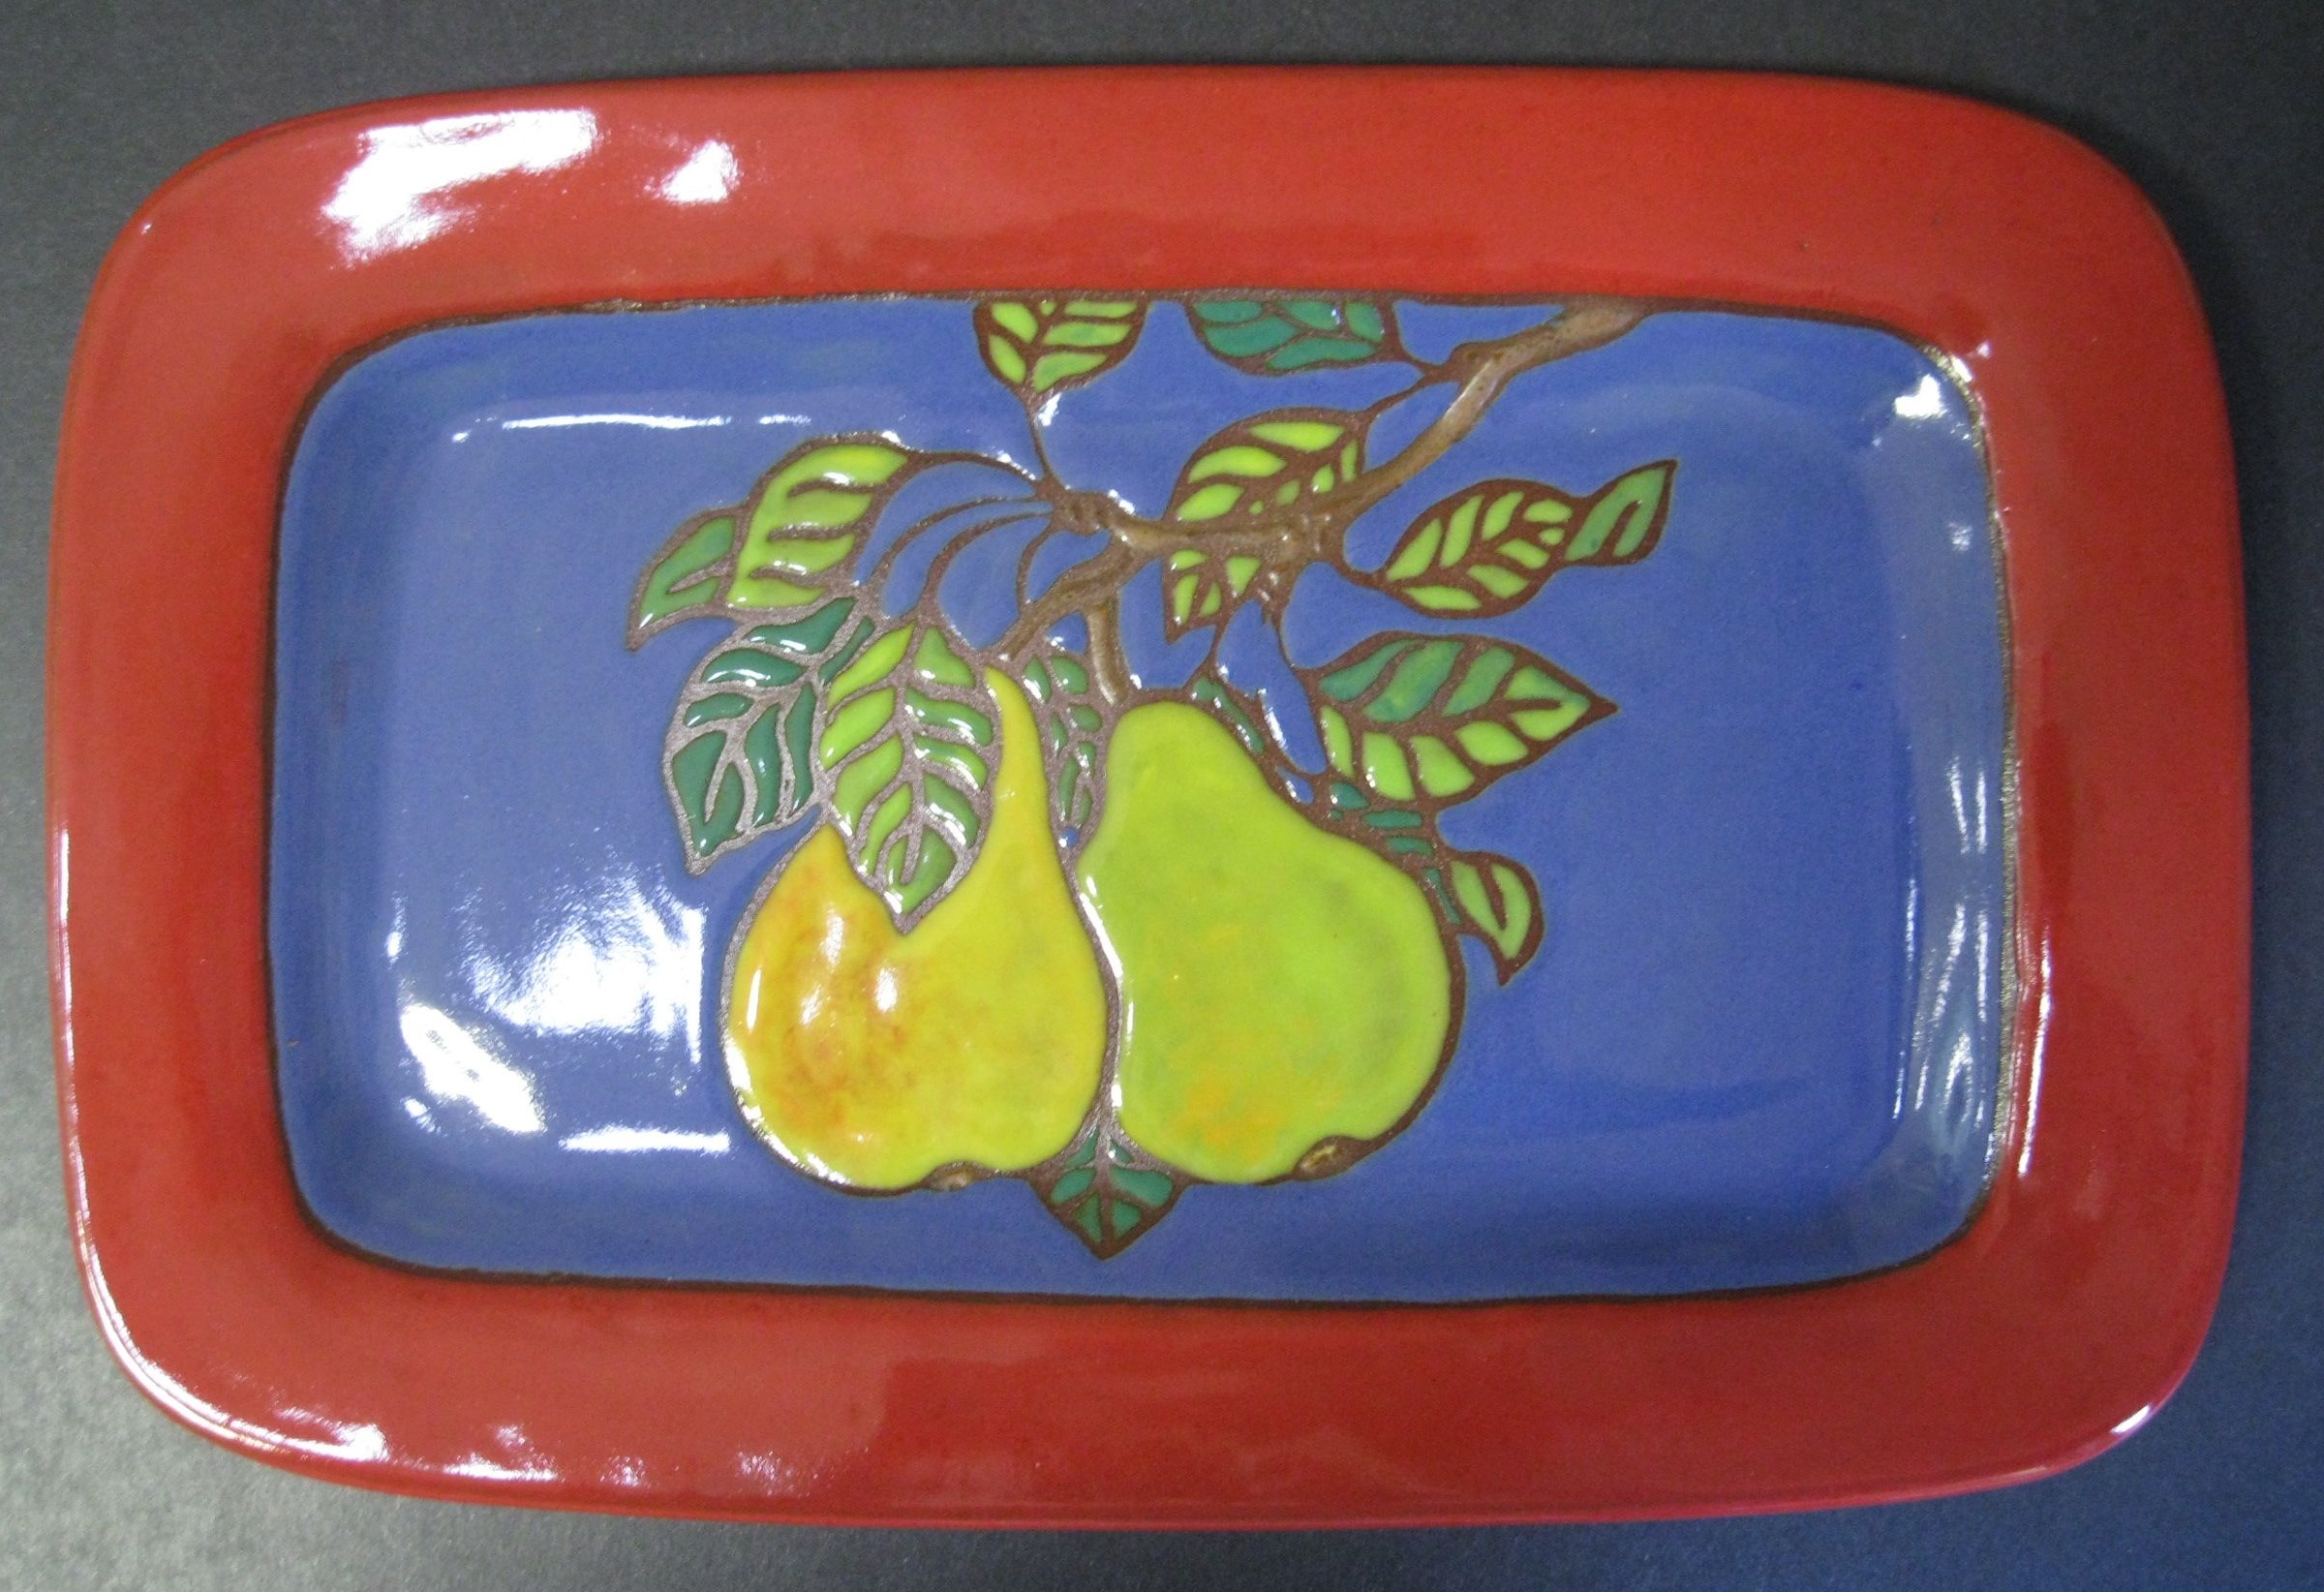 Red and Blue Rectangular Serving Dish with Cuerda Seca Pear Design